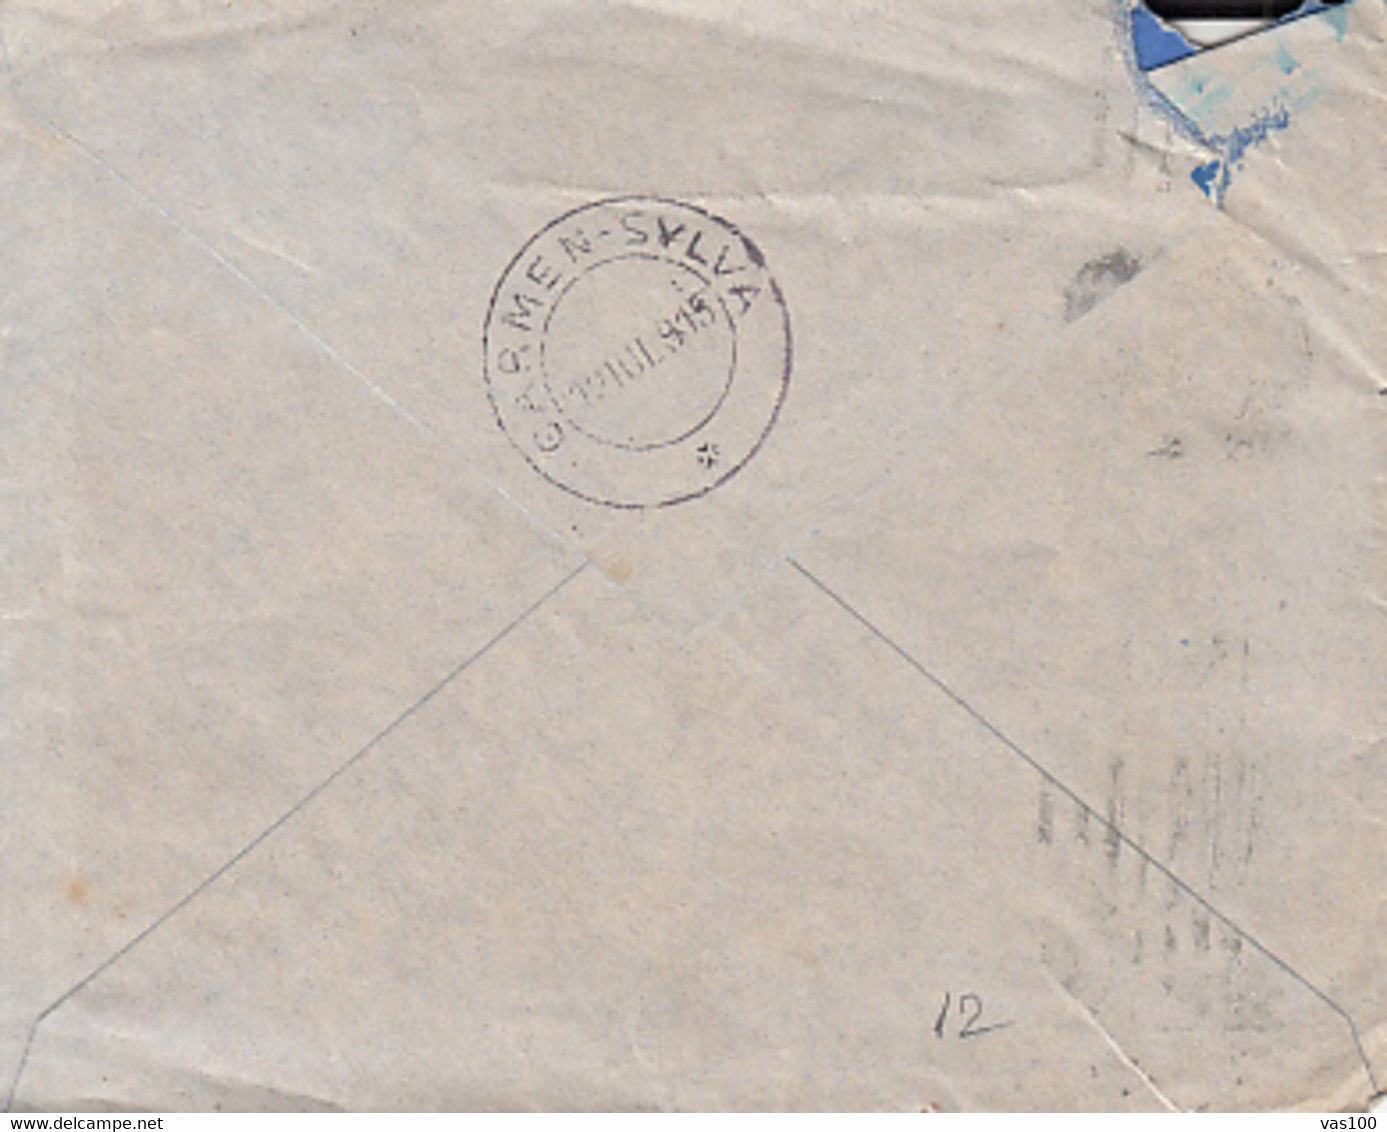 KING CAROL I STAMPS, TIMBRU DE AJUTOR OVERPRINT STAMPS ON COVER, 1915, ROMANIA - Covers & Documents